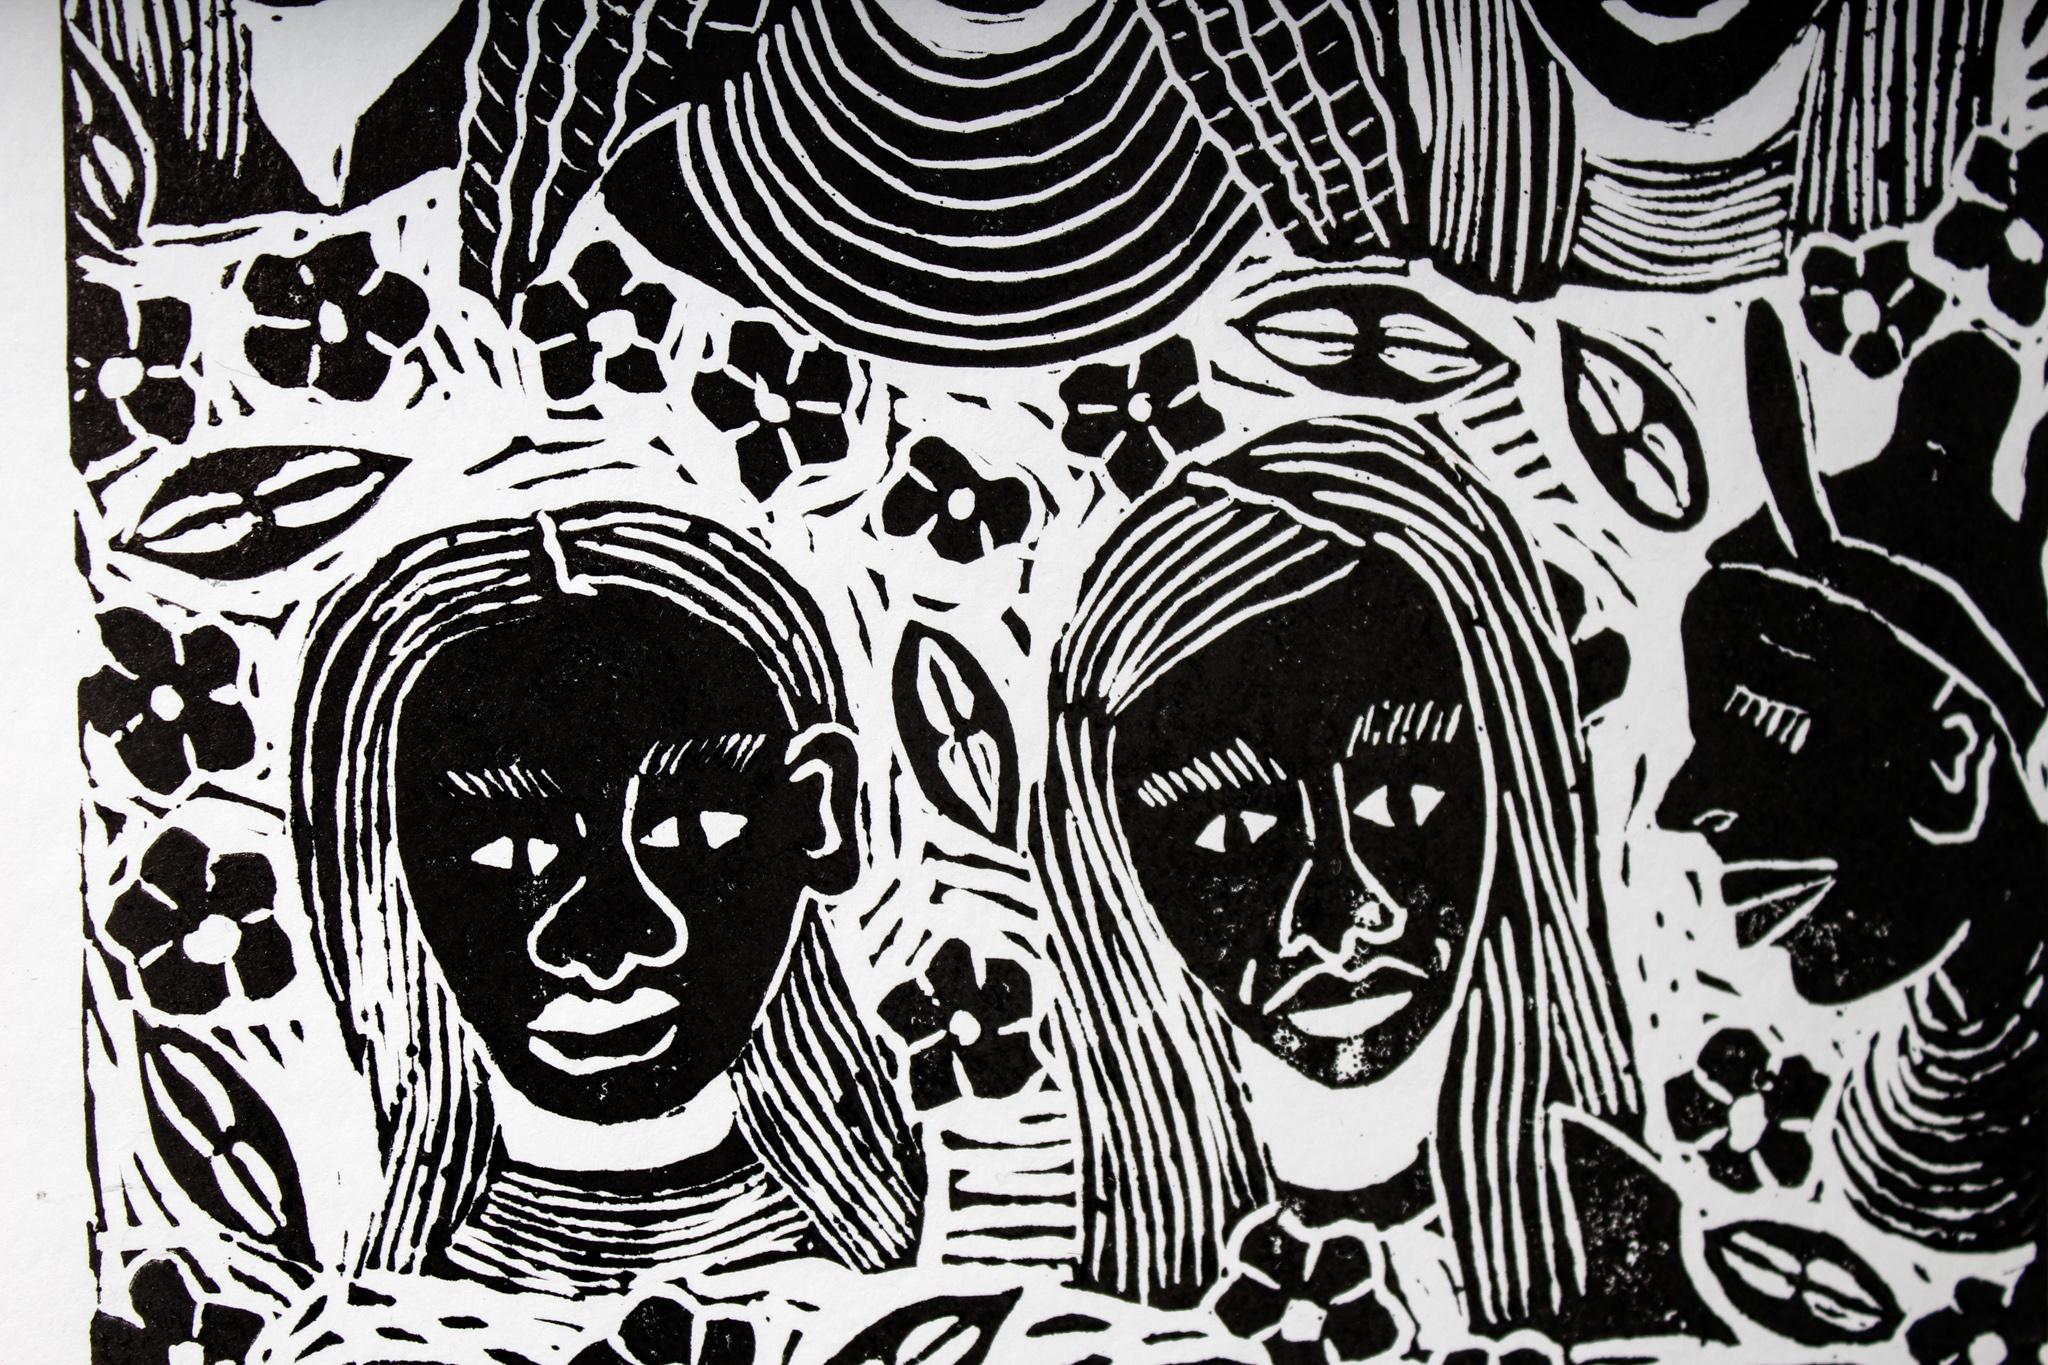 We are your mothers, Linoleum block prints on paper.

Elia Shiwoohamba was born in 1981 in Windhoek, Namibia. He graduated from the John Muafangejo Art Centre in Windhoek in 2006. Specialising in printmaking and sculpture, Shiwoohamba works as a